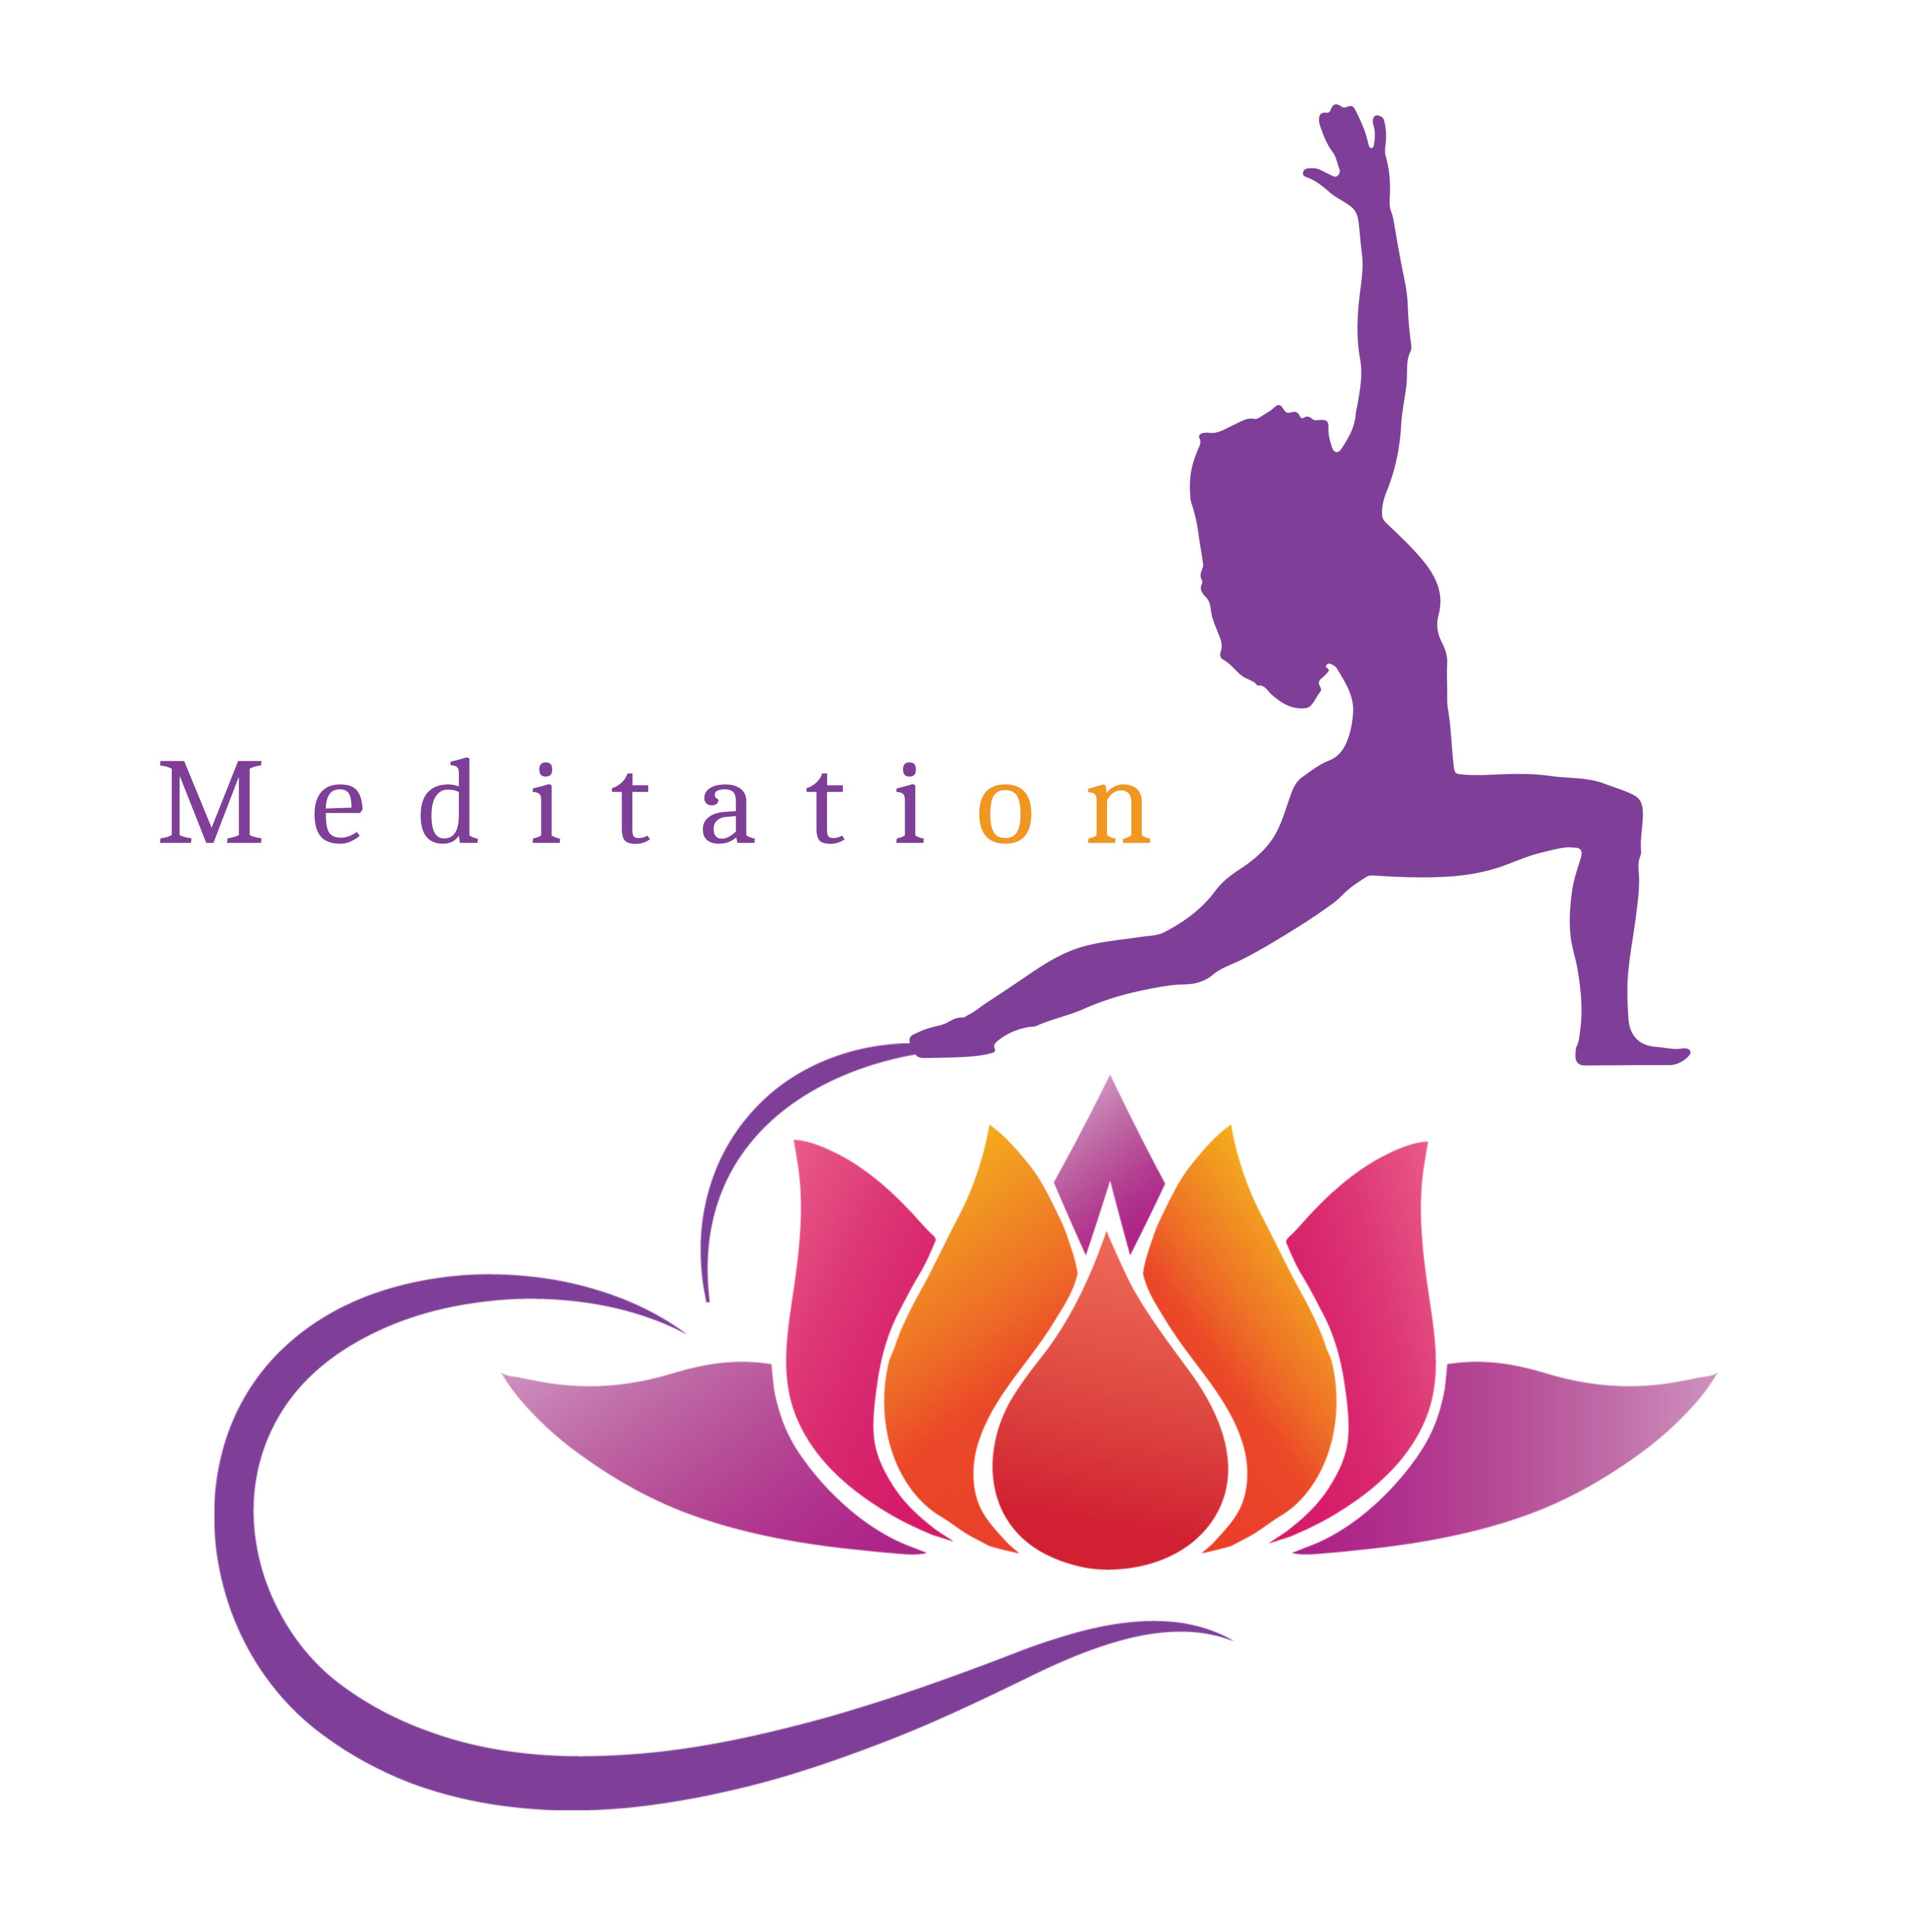 Meditation – Calm Down, Relaxation Sounds, Clear Mind, Focus, Concentration, Training Yoga, Stress Free, Calmness